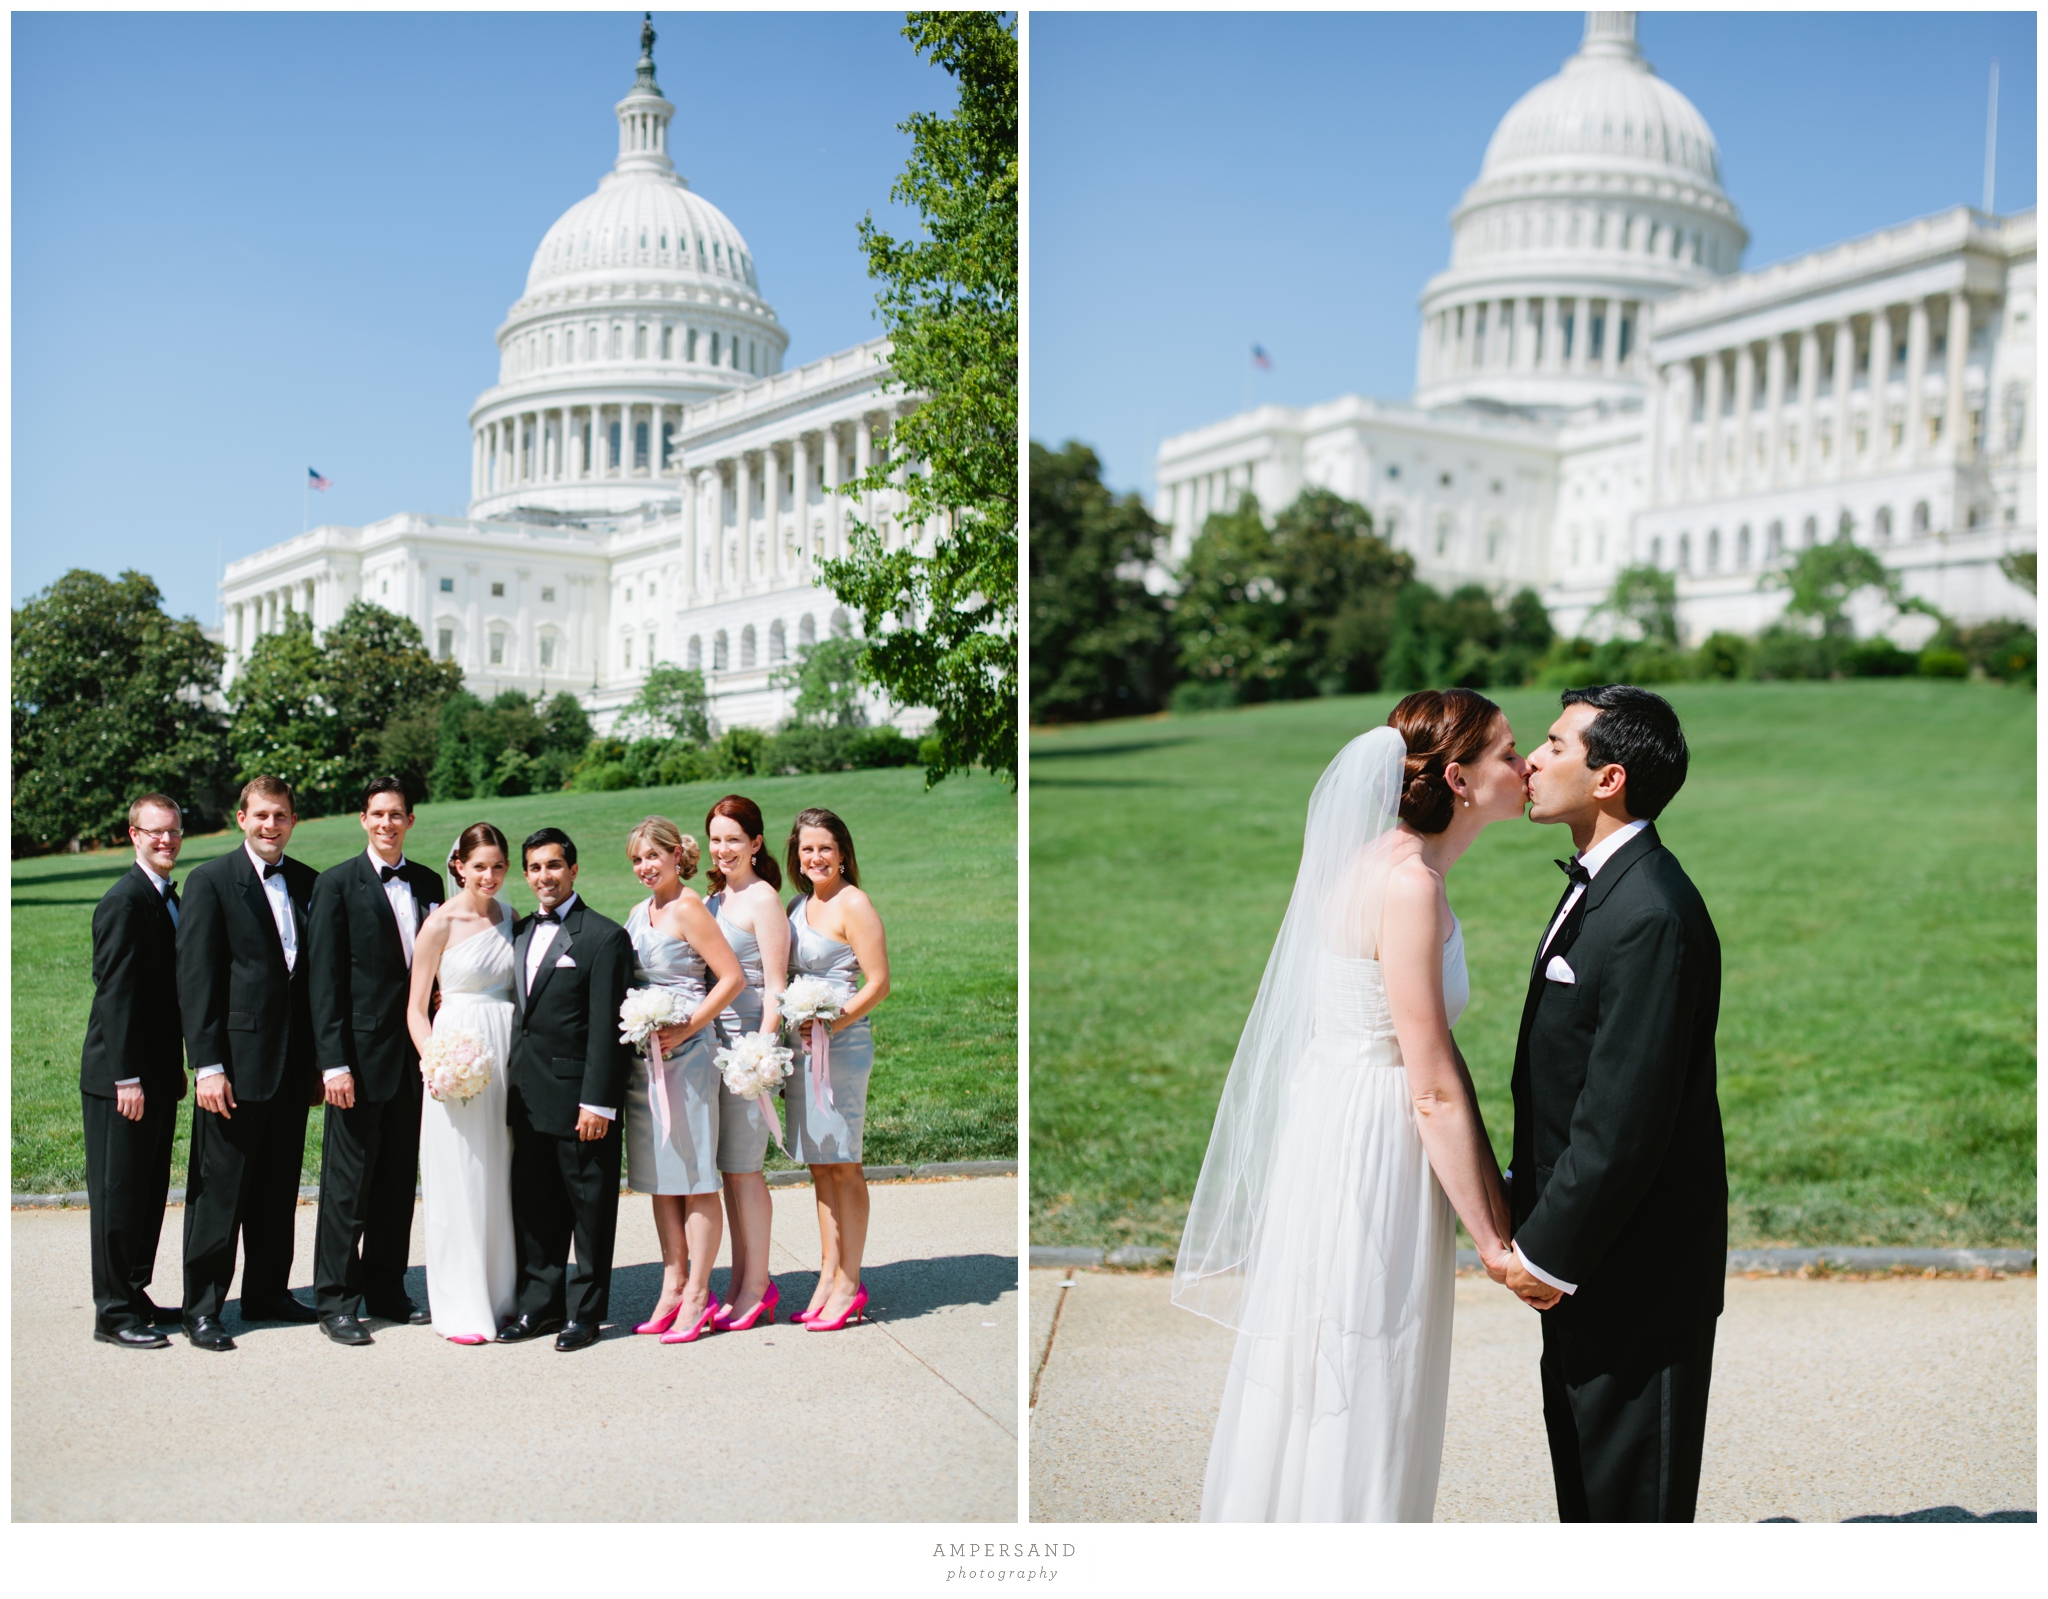 US Capitol wedding party pictures // Photos by Ampersand Photography